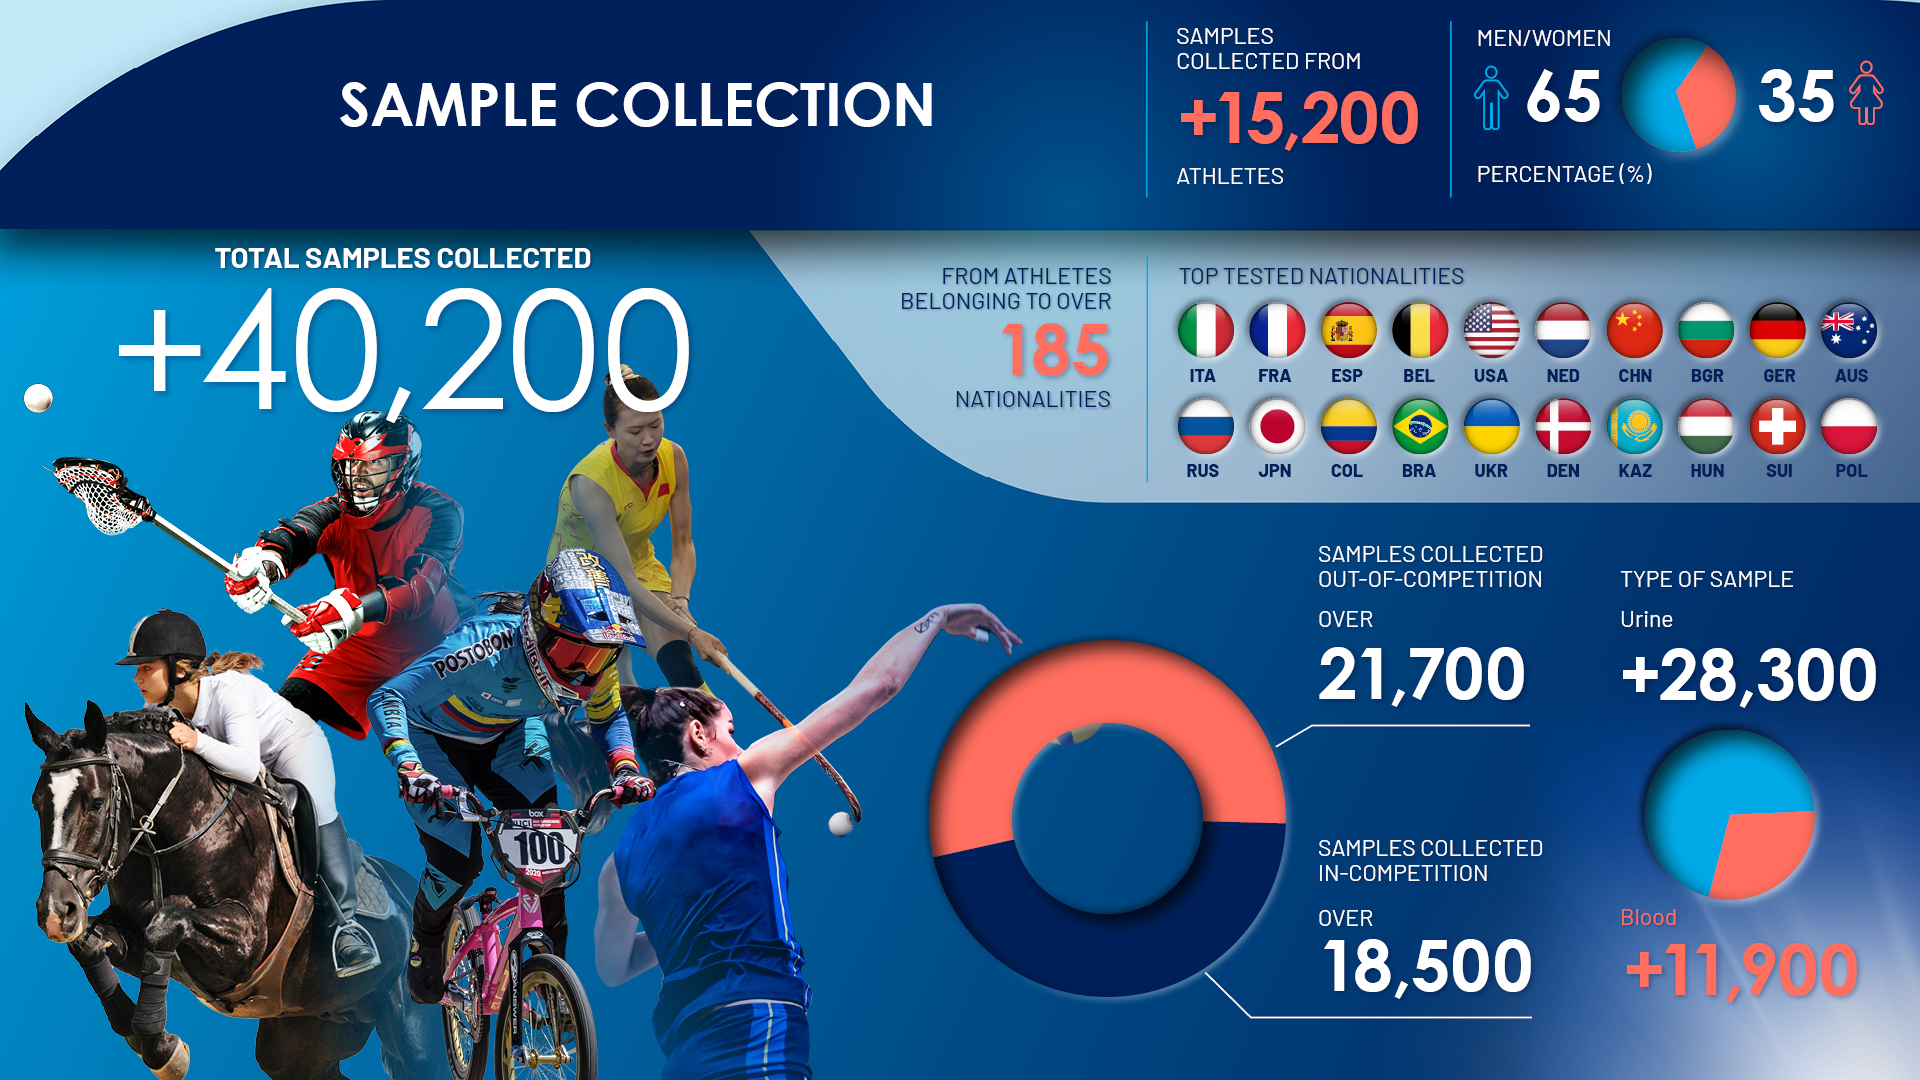 The ITA releases 2023 operational figures, continues its growth as the largest anti-doping organisation globally and focuses on its 2023-26 strategic plan